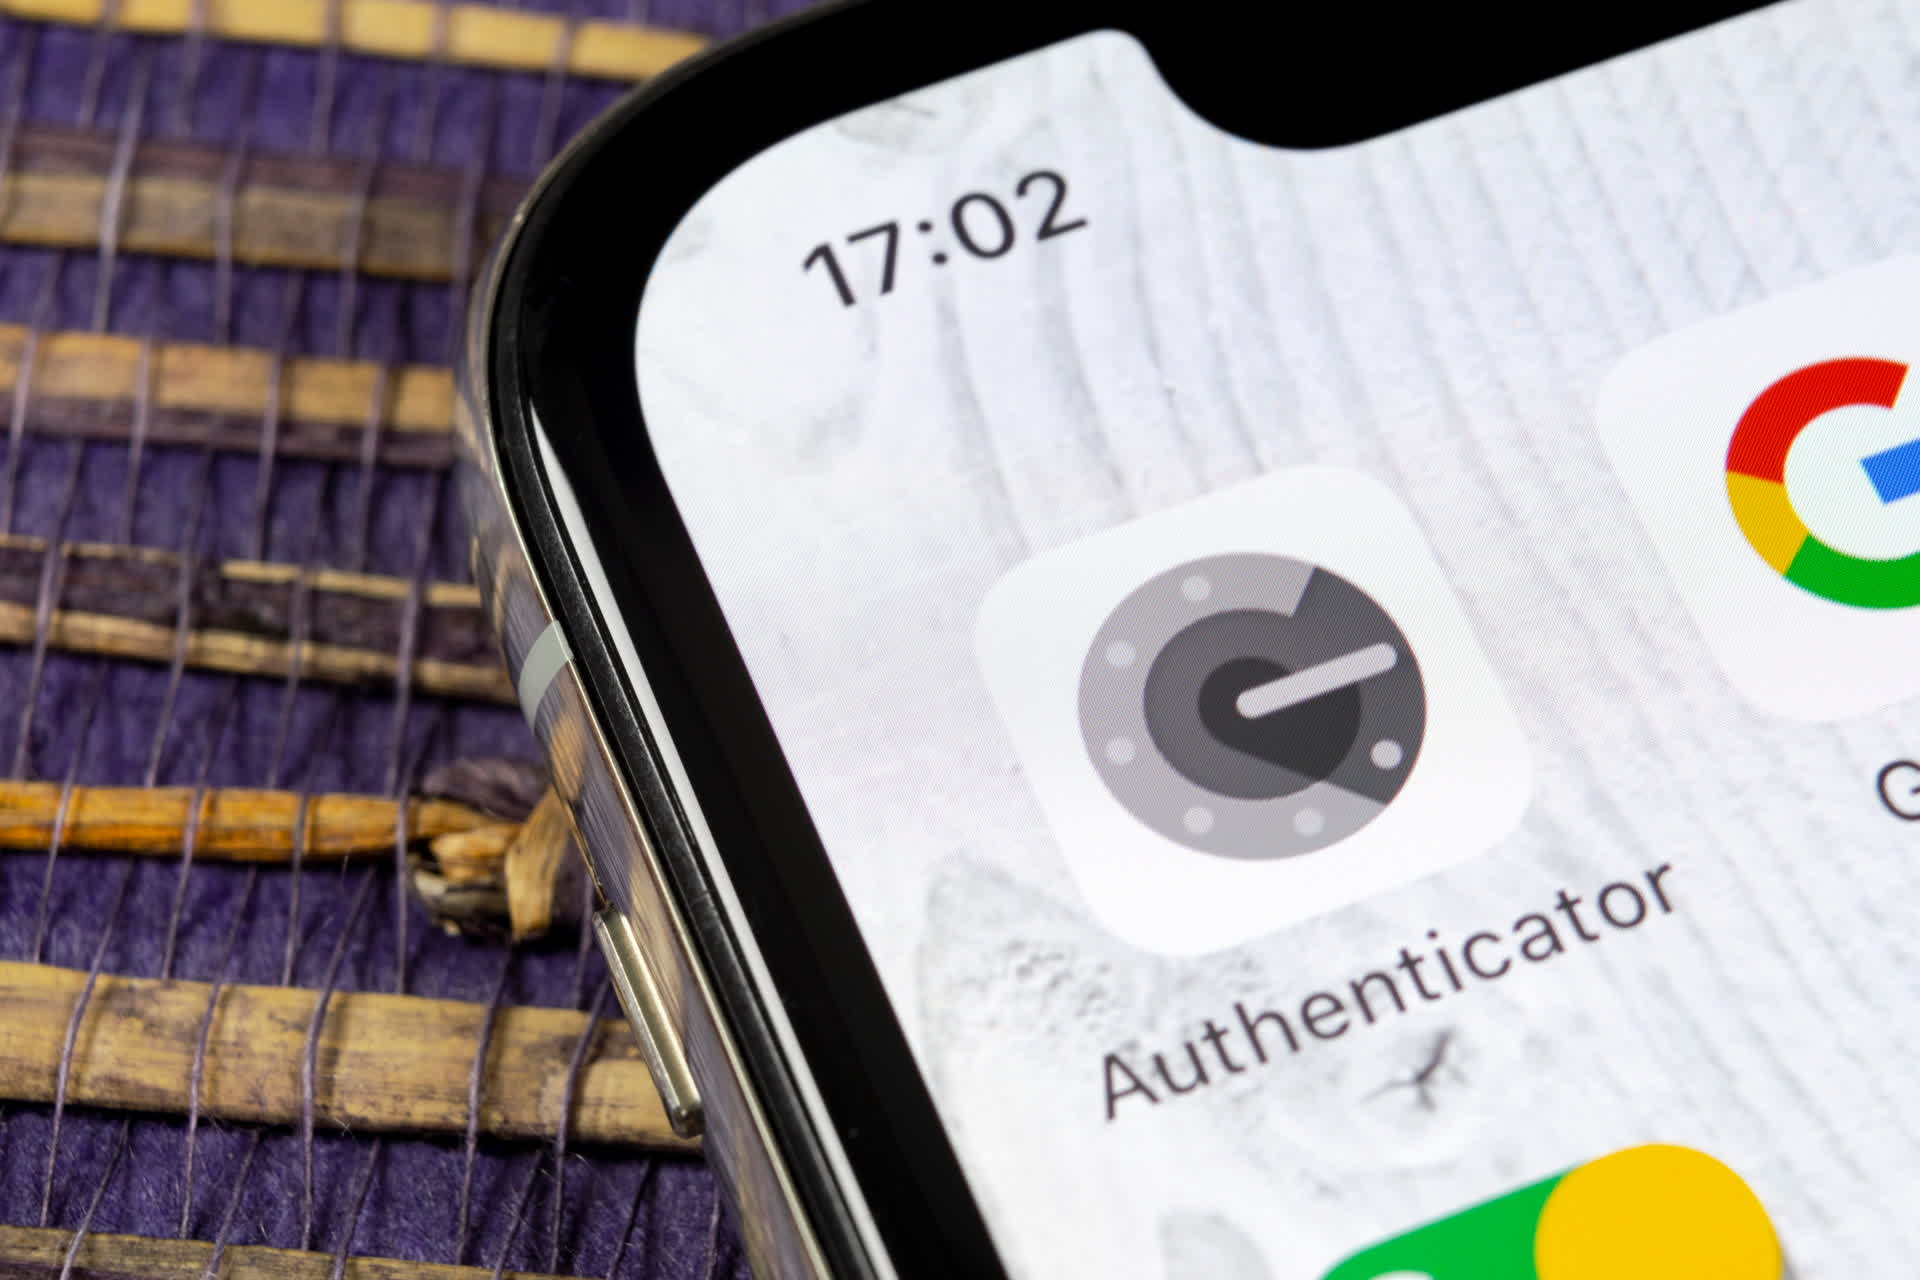 Google Authenticator for iOS gets a new look and a bulk account export feature